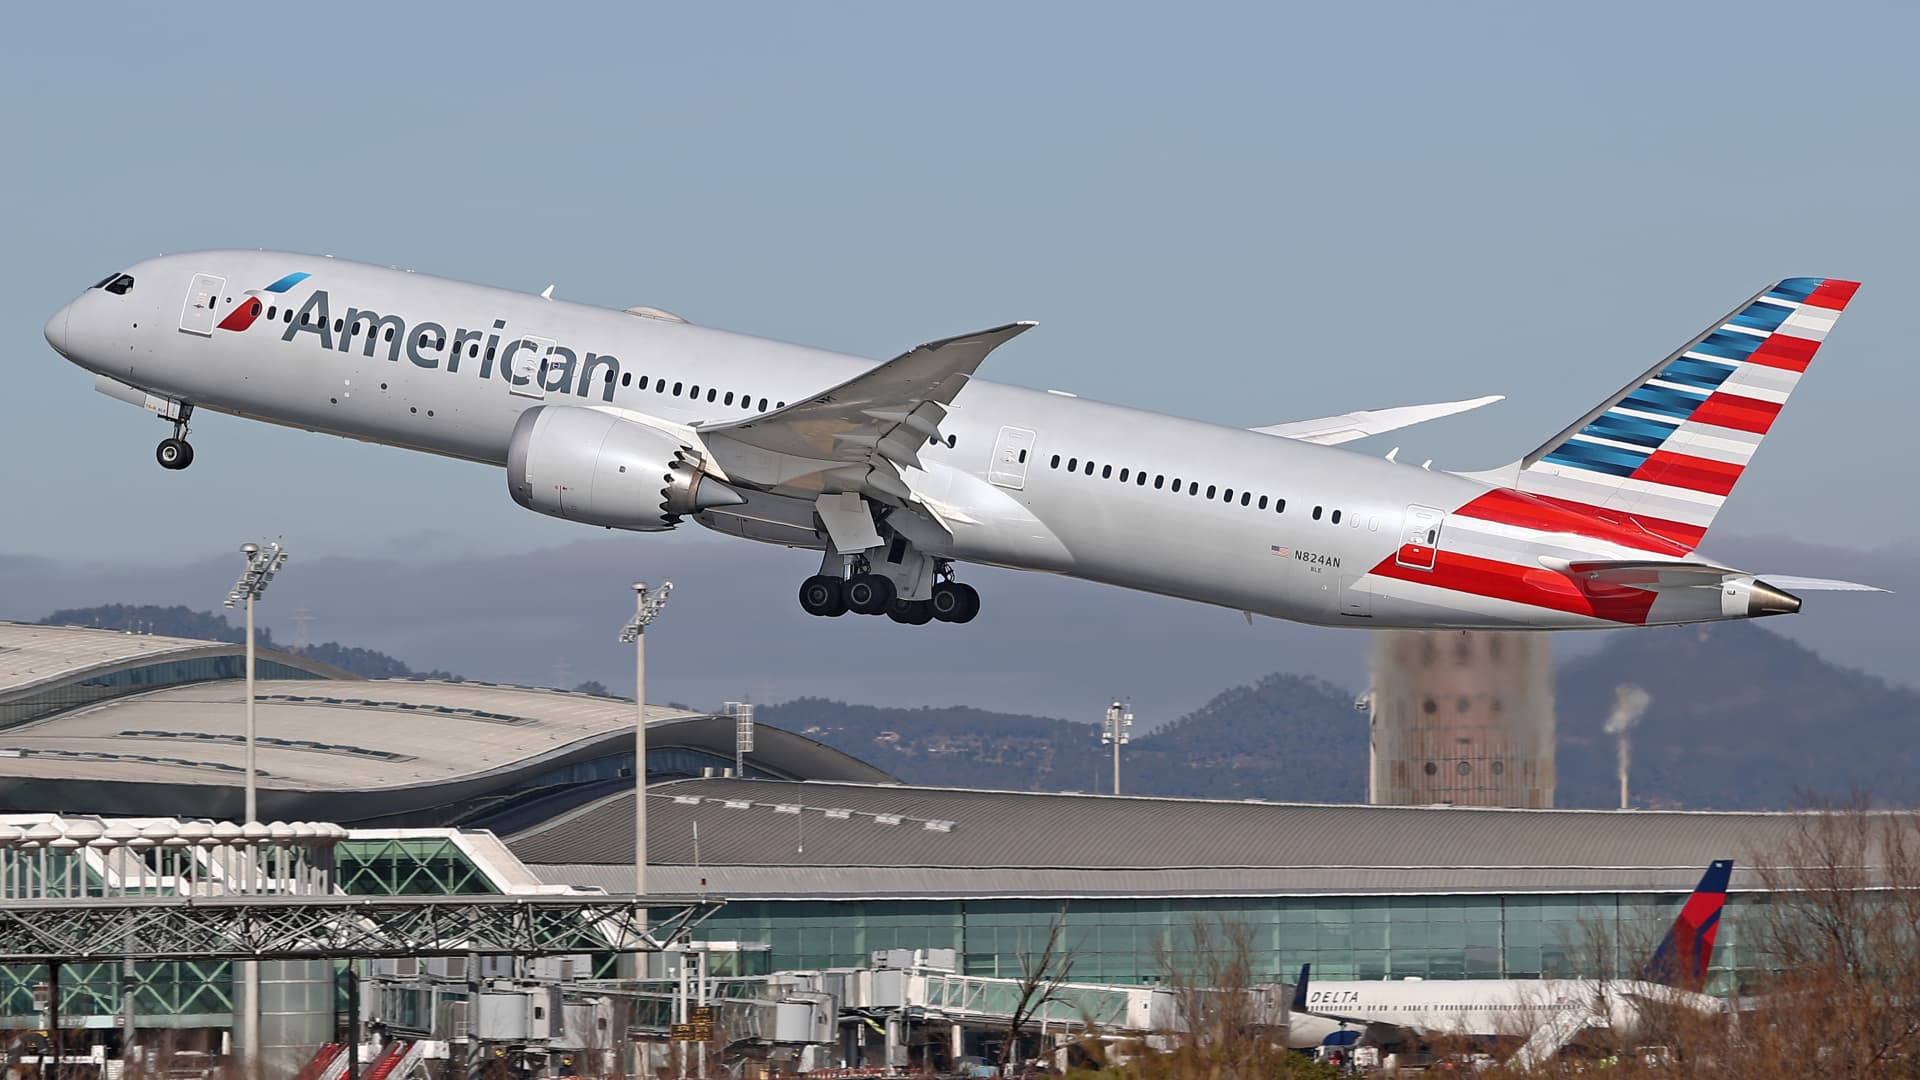 American Airlines Suspends Flights to Europe and South America Due to Boeing 787 Delivery Delays: A Look at the Impact on the Carrier's International Routes